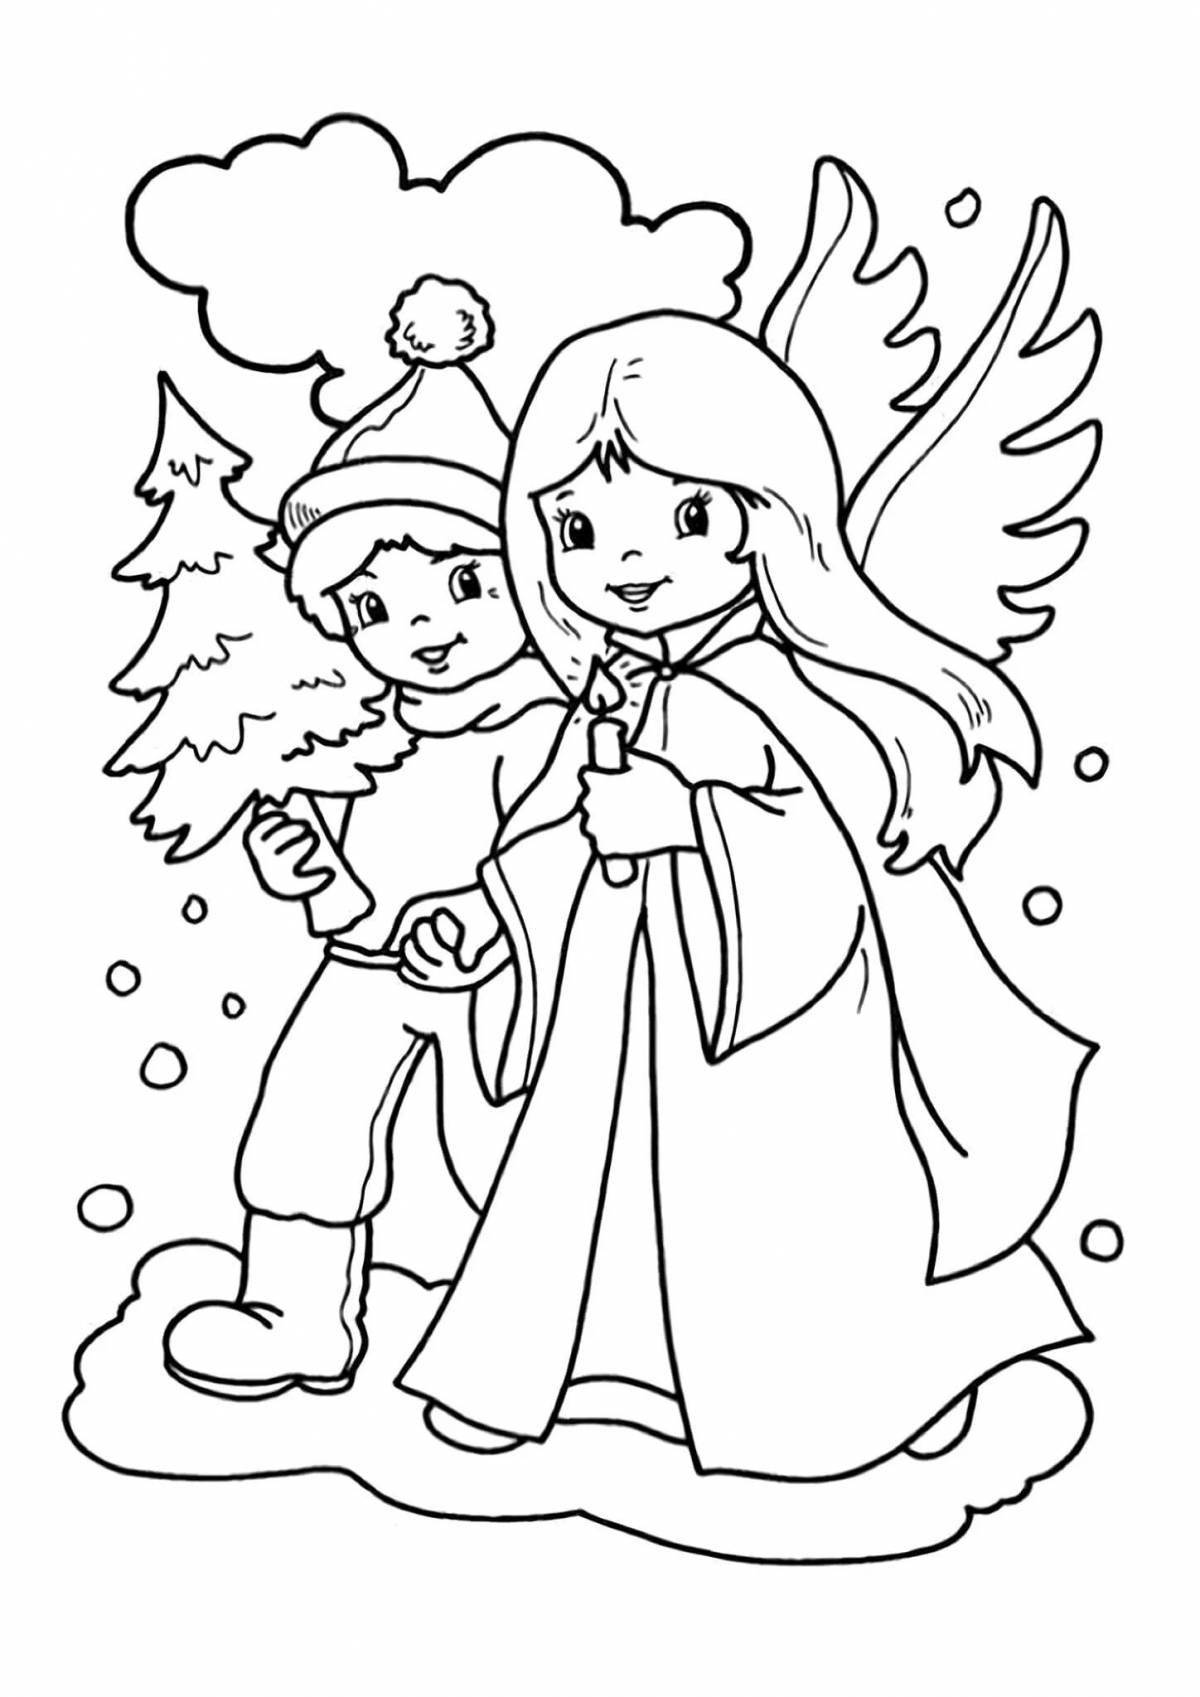 Glowing Christmas story coloring book